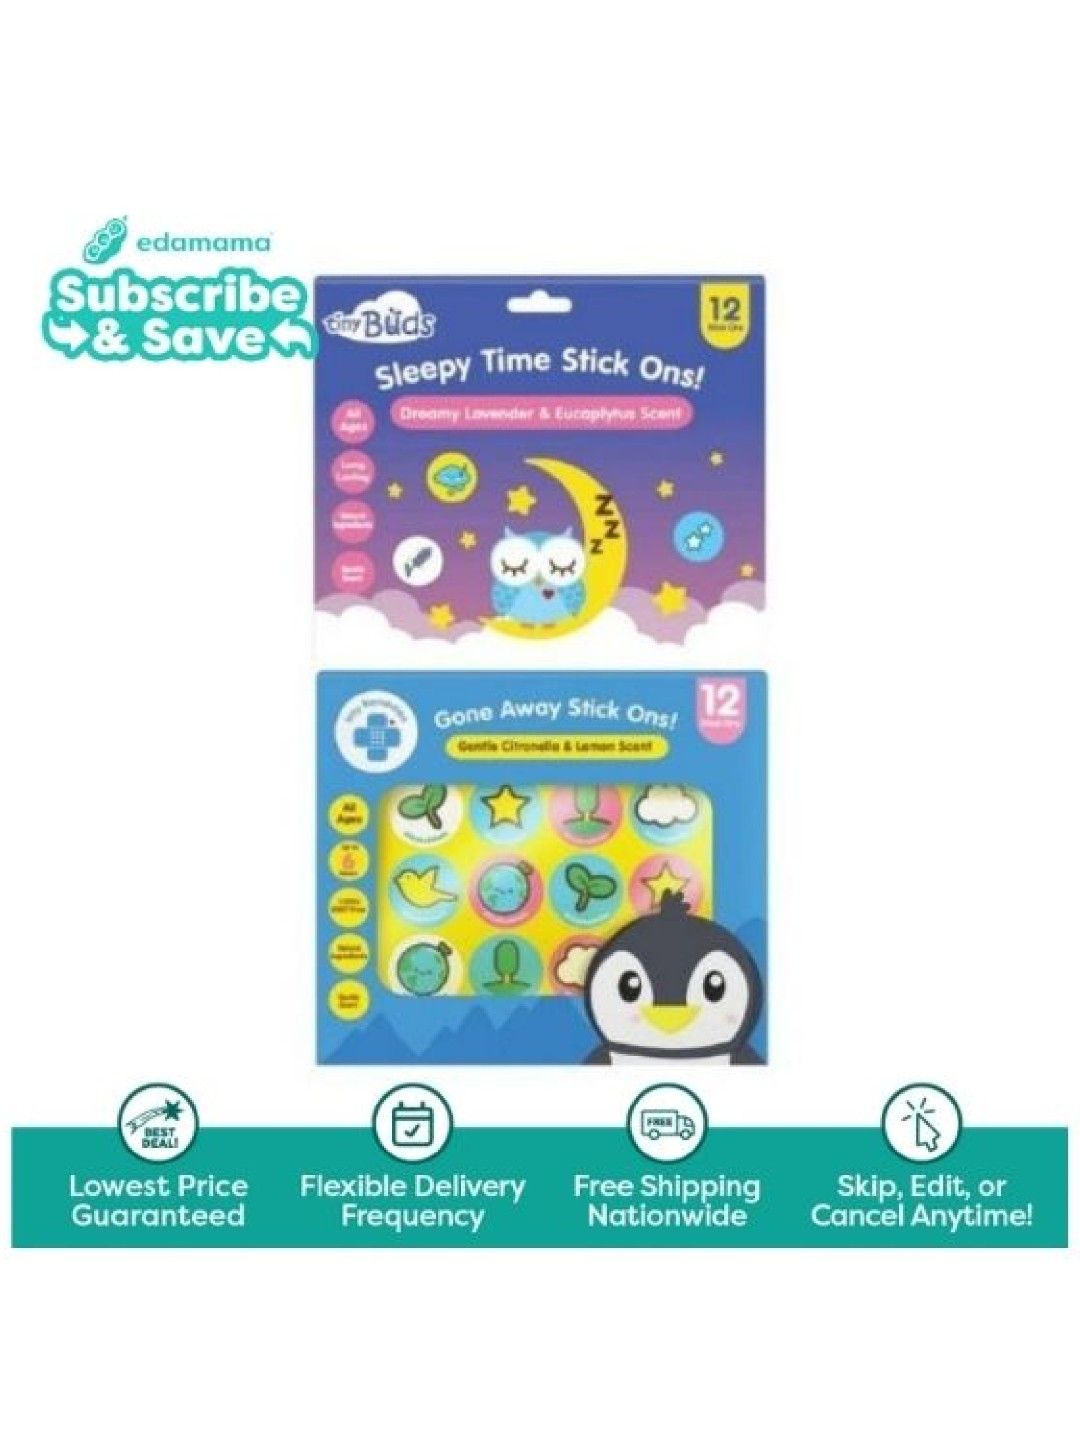 Tiny Buds Sleepy Time Stick Ons (12 pcs) and Gone Away Stick Ons (12 pcs) - Subscription